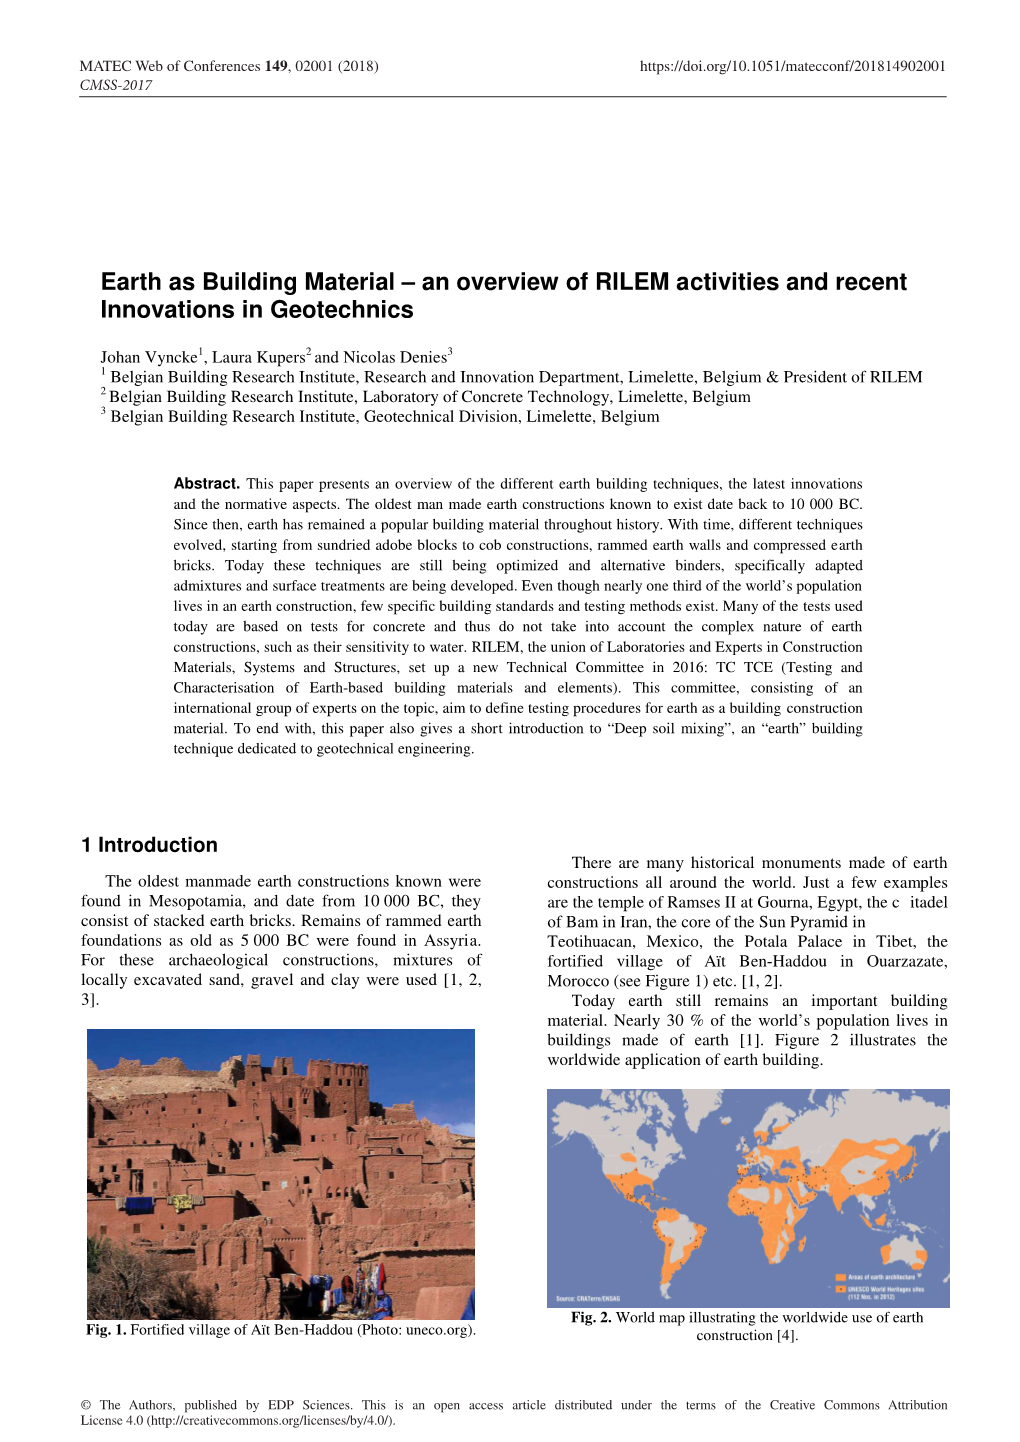 Earth As Building Material – an Overview of RILEM Activities and Recent Innovations in Geotechnics